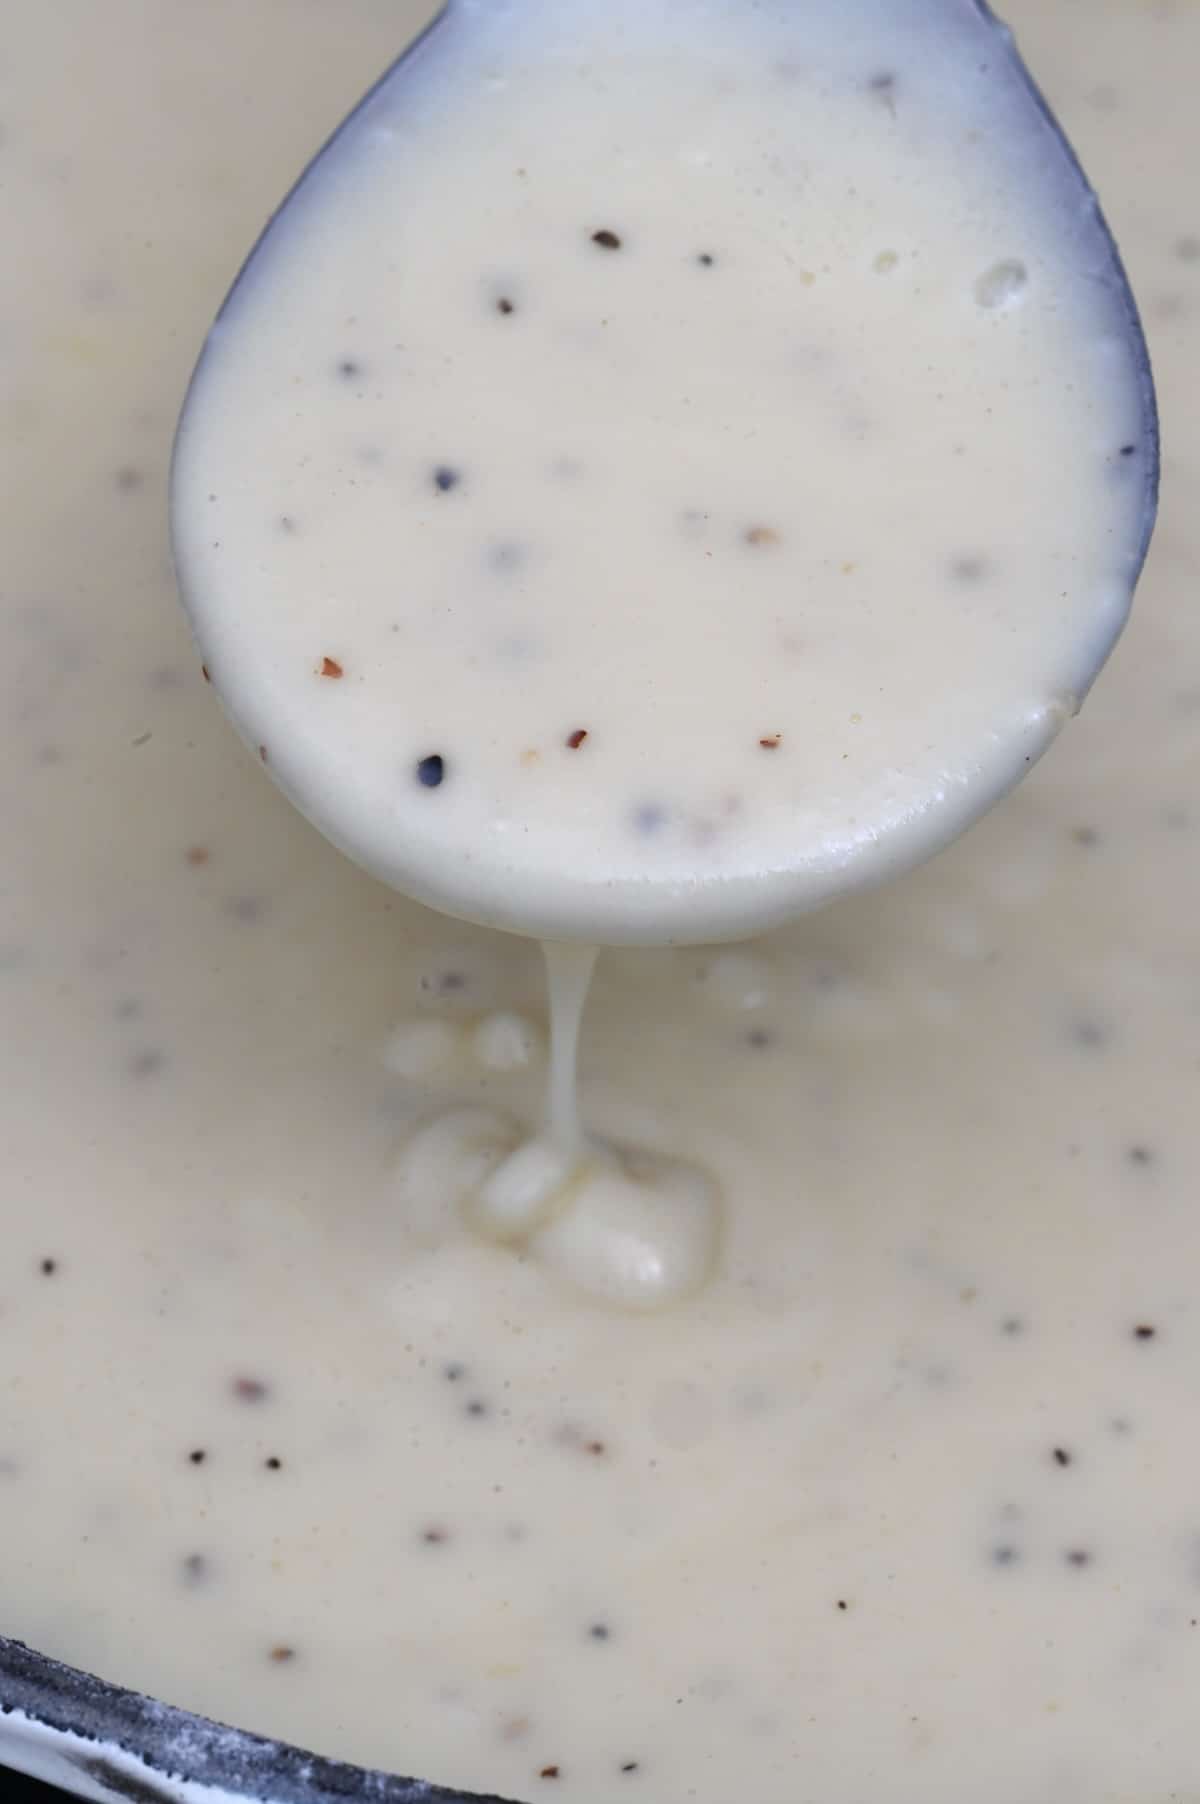 White gravy dripping from a spoon